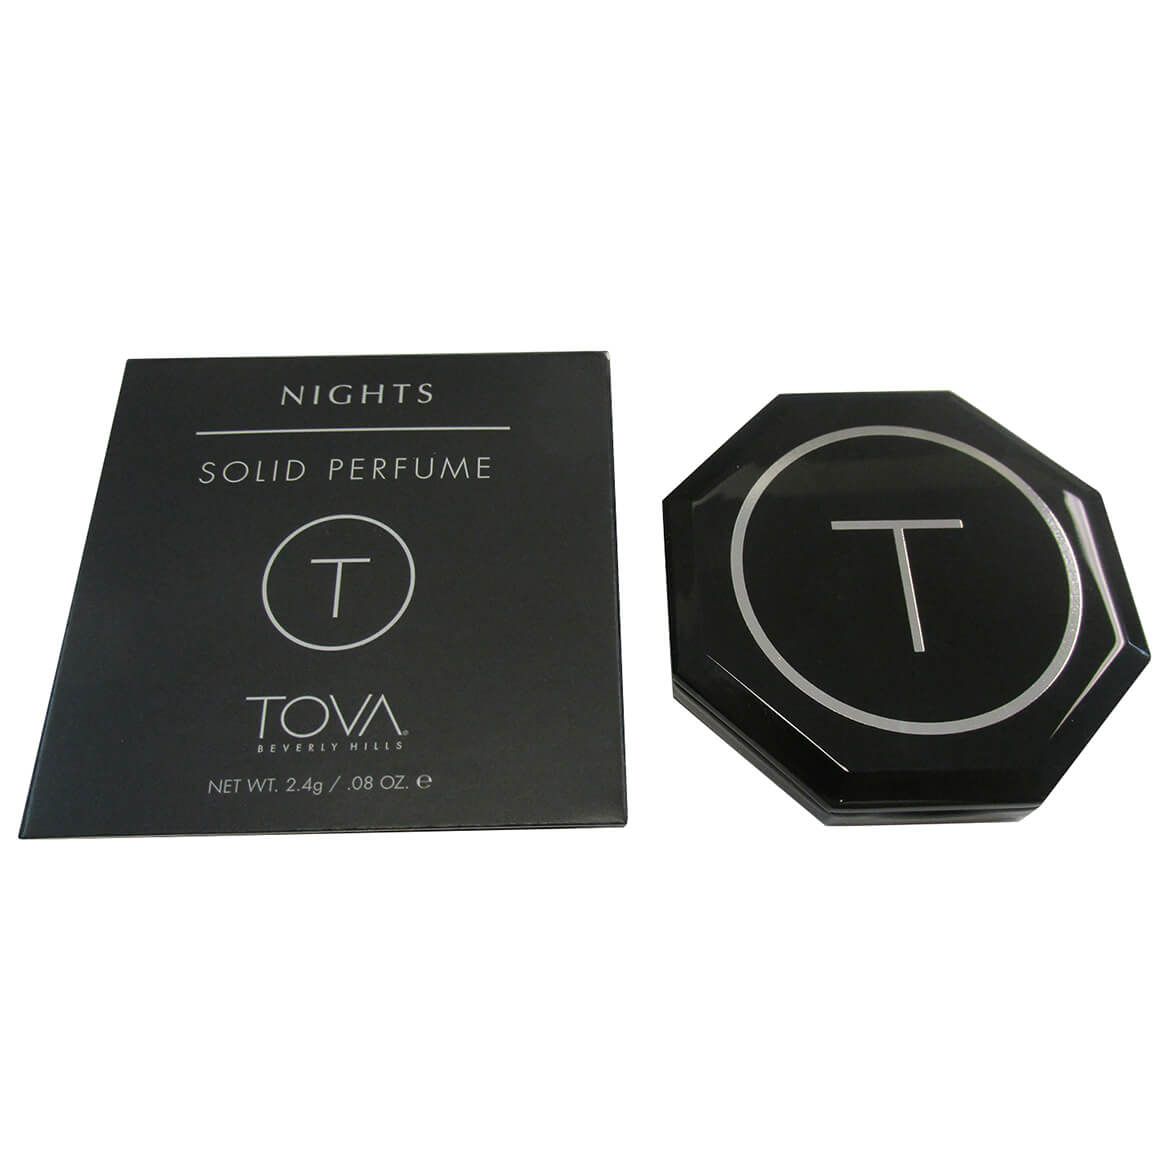 Tova Nights Solid Perfume for Women Compact, 2.4 g + '-' + 377340